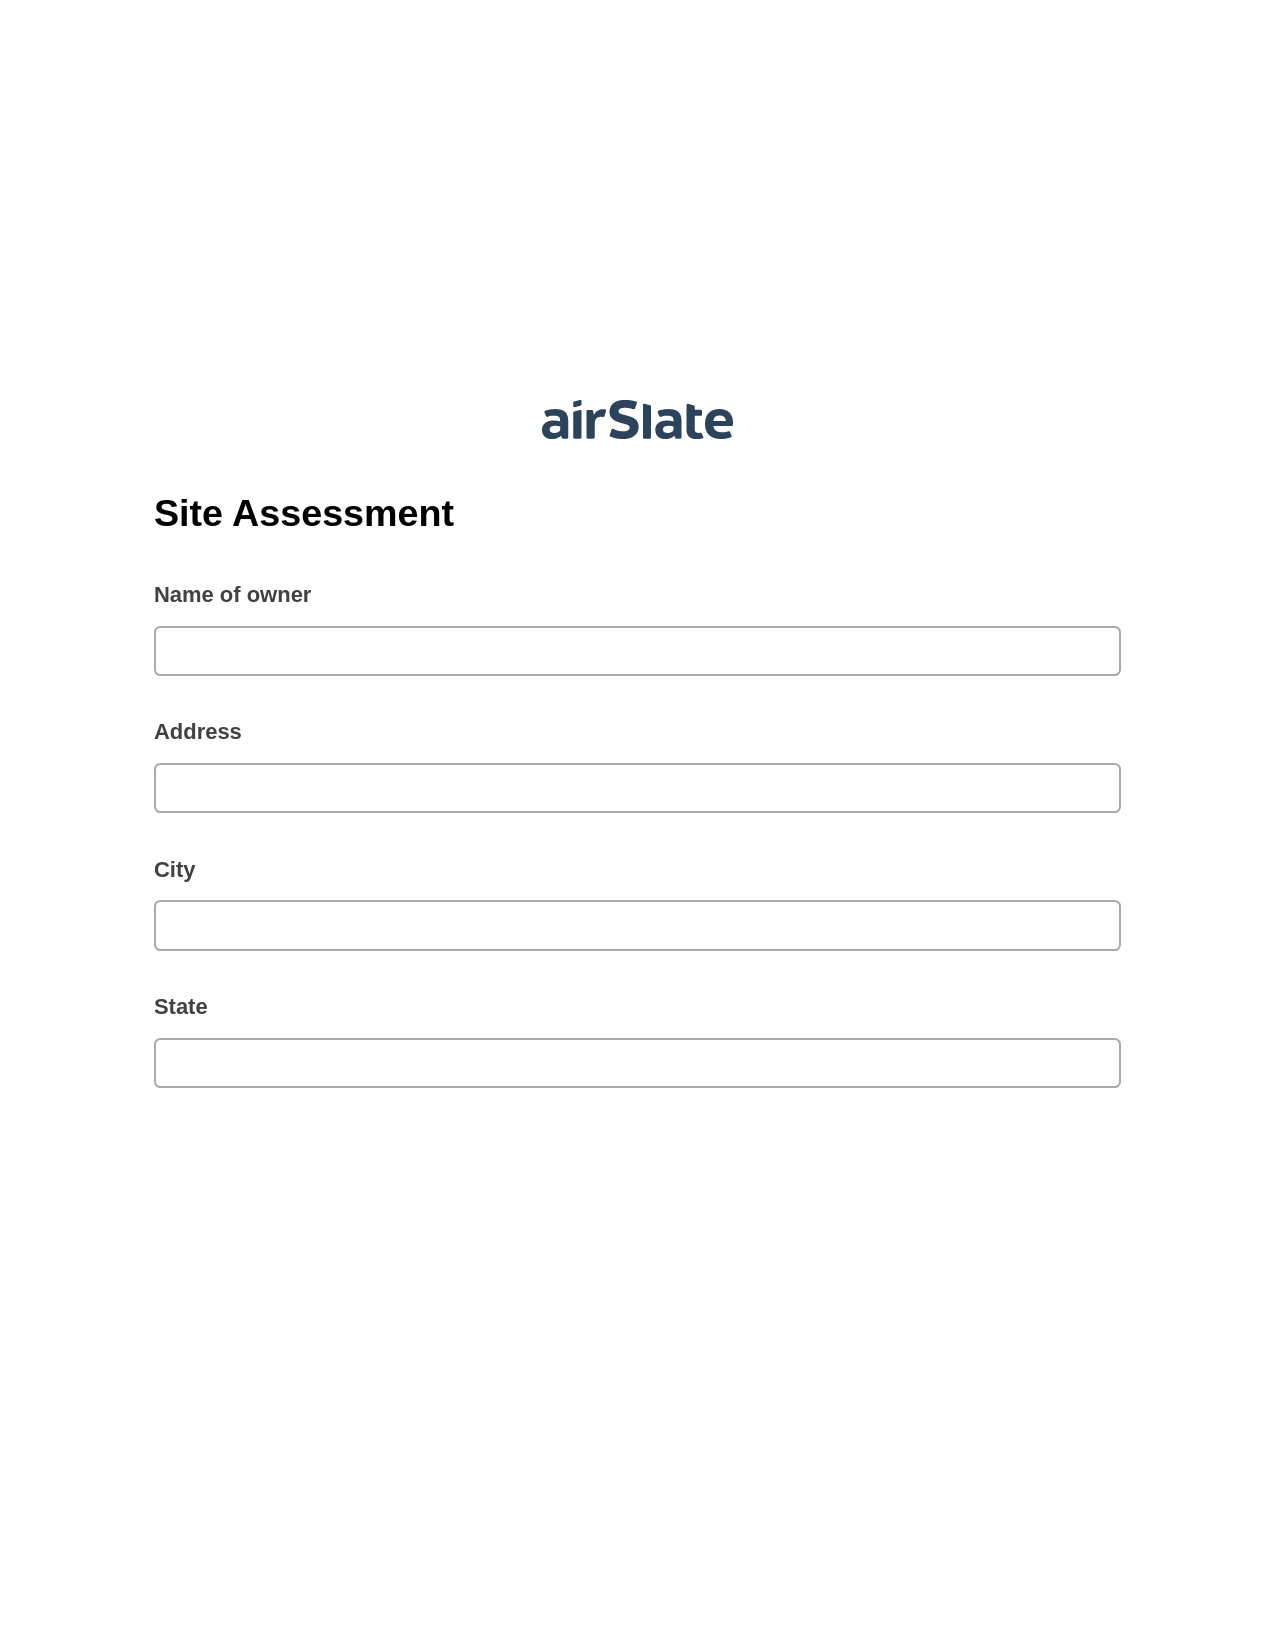 Multirole Site Assessment Pre-fill from Google Sheets Bot, System Bot - Create a Slate in another Flow, Export to Google Sheet Bot